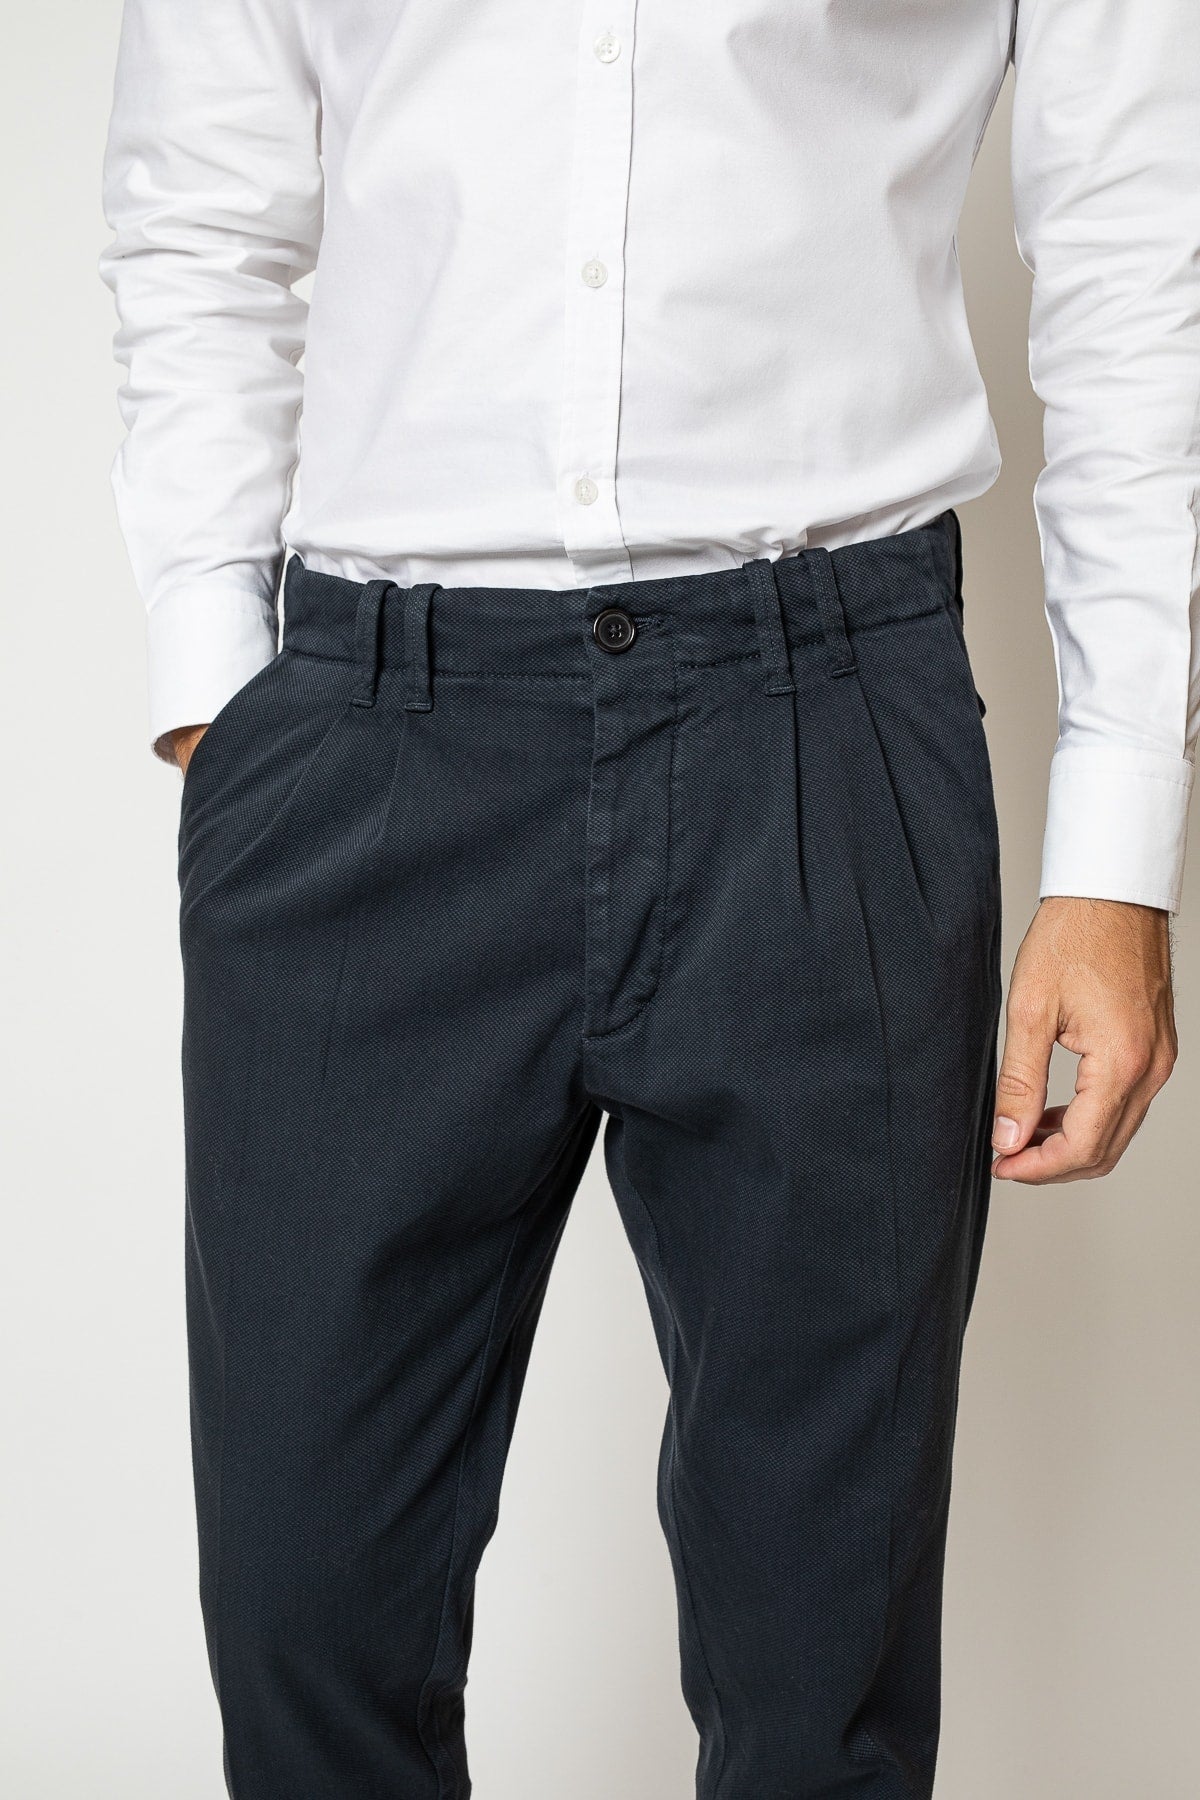 Jaqk - Navy Blue Trousers - Closer - The Good Chic